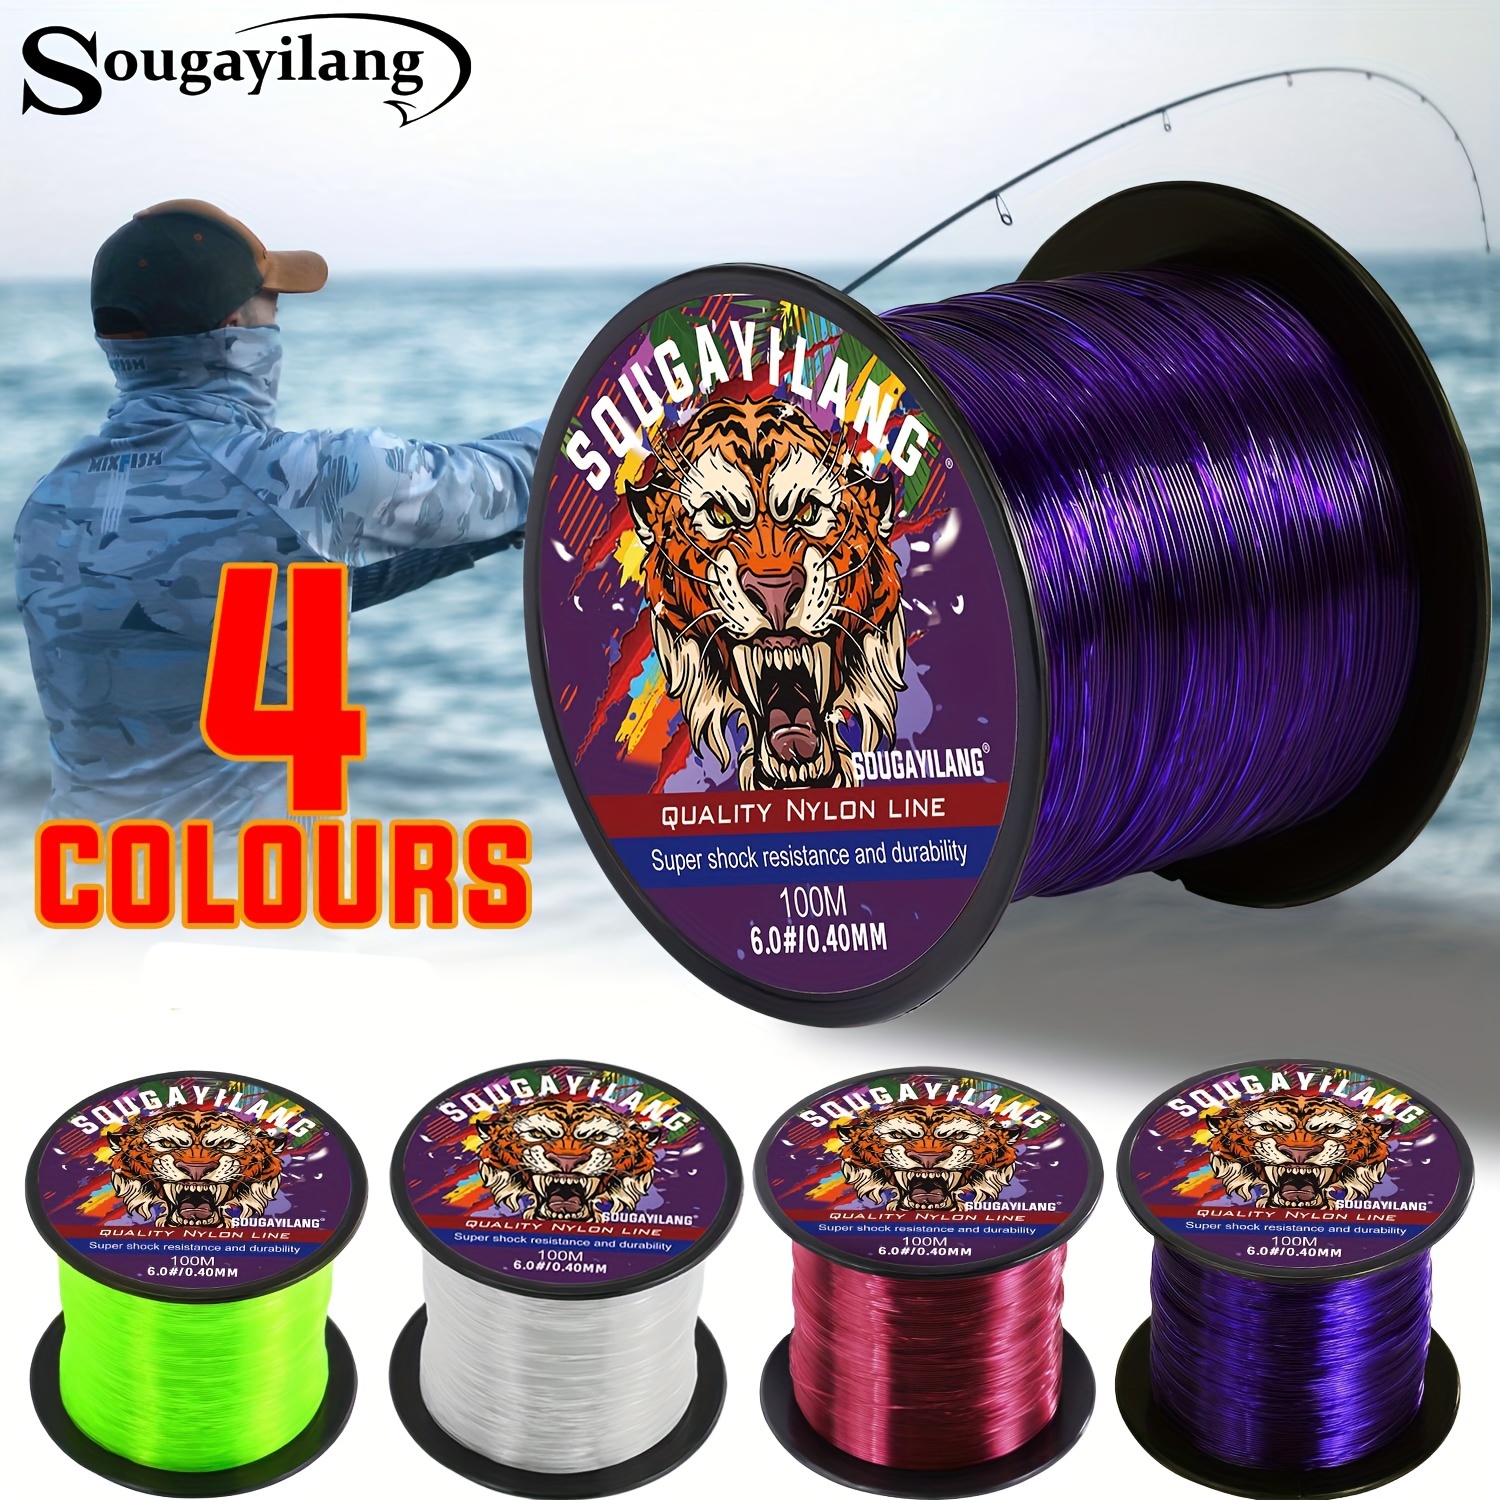 Durable Dark Green Monofilament Fishing Line - 2.84lb to 39.24lb Strength -  500m Length - Perfect for All Fishing Enthusiasts